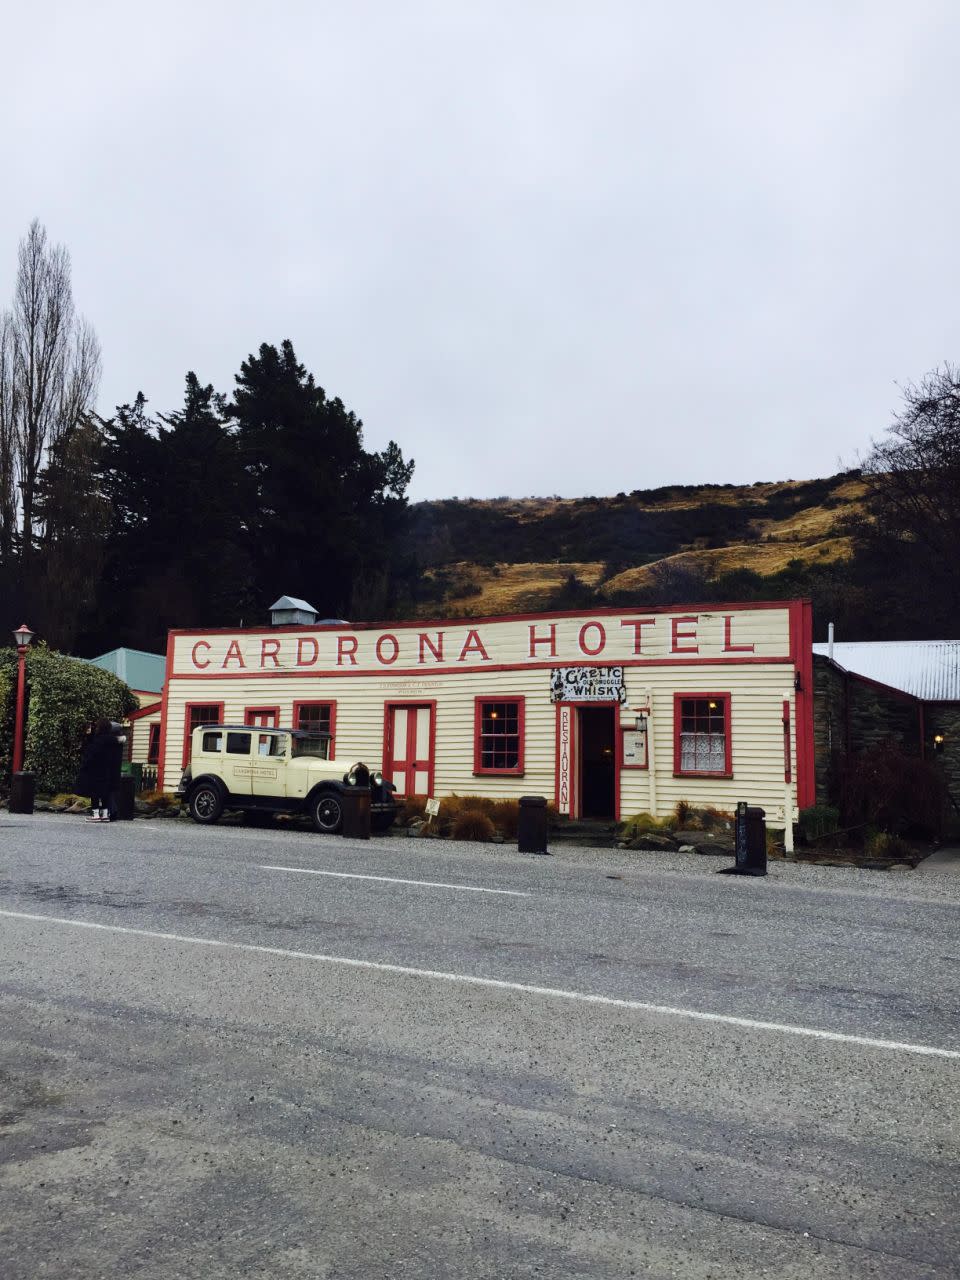 Stop at the Cardrona Hotel if you&#39;re looking for an epic pub feed between Wanaka and Queenstown. Photo: Be